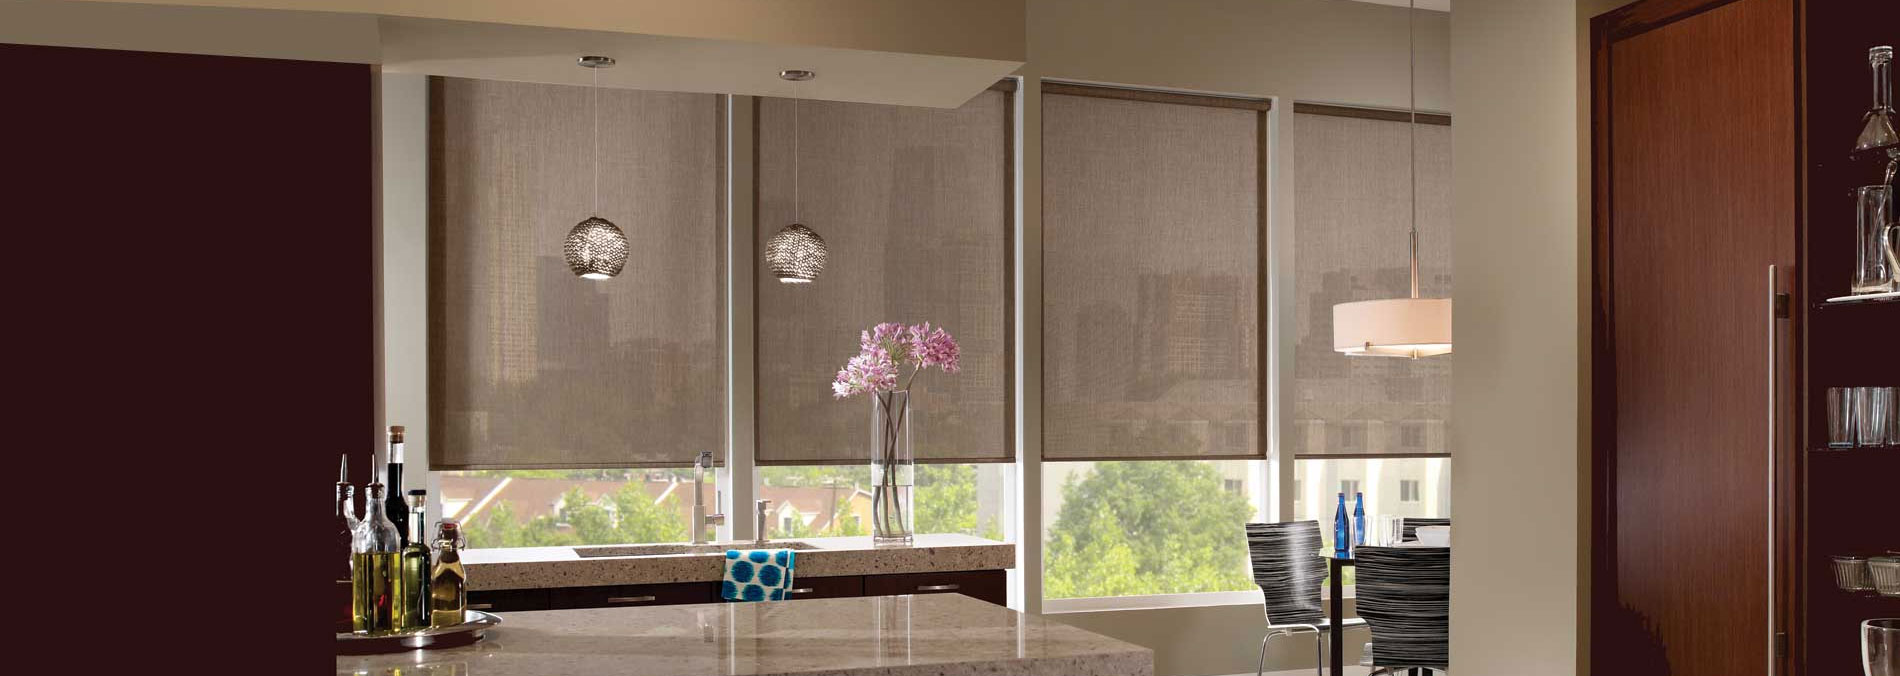 roller shades and custom shade installation from Accent Verticals in Portland Or Lake Oswego Oregon and Vancouver Wa